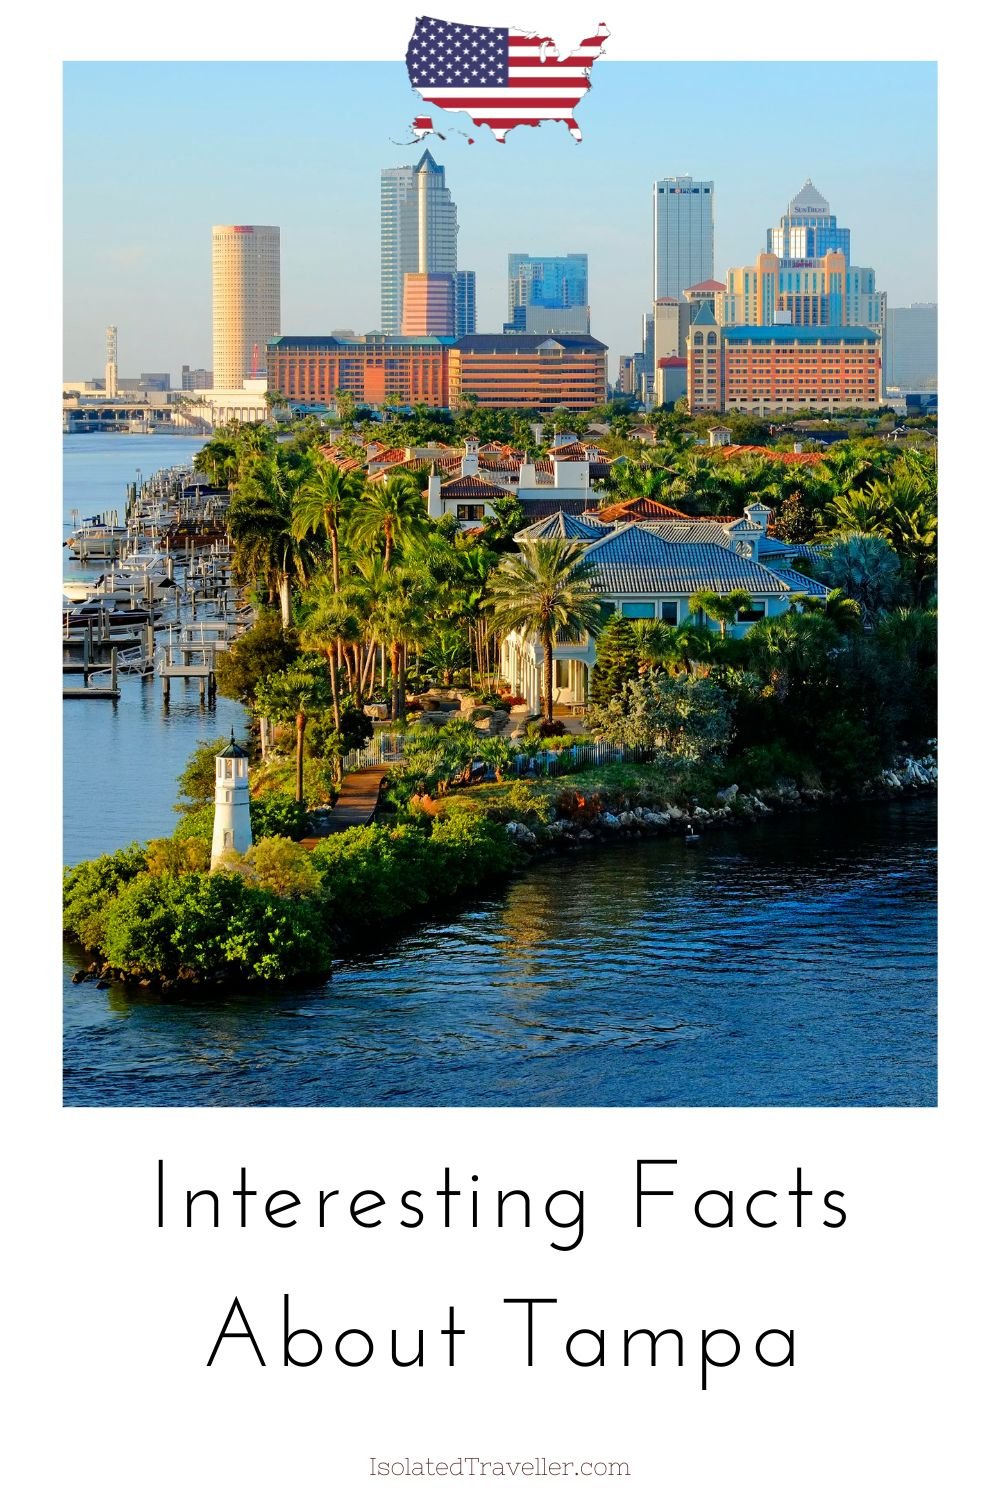 Facts About Tampa